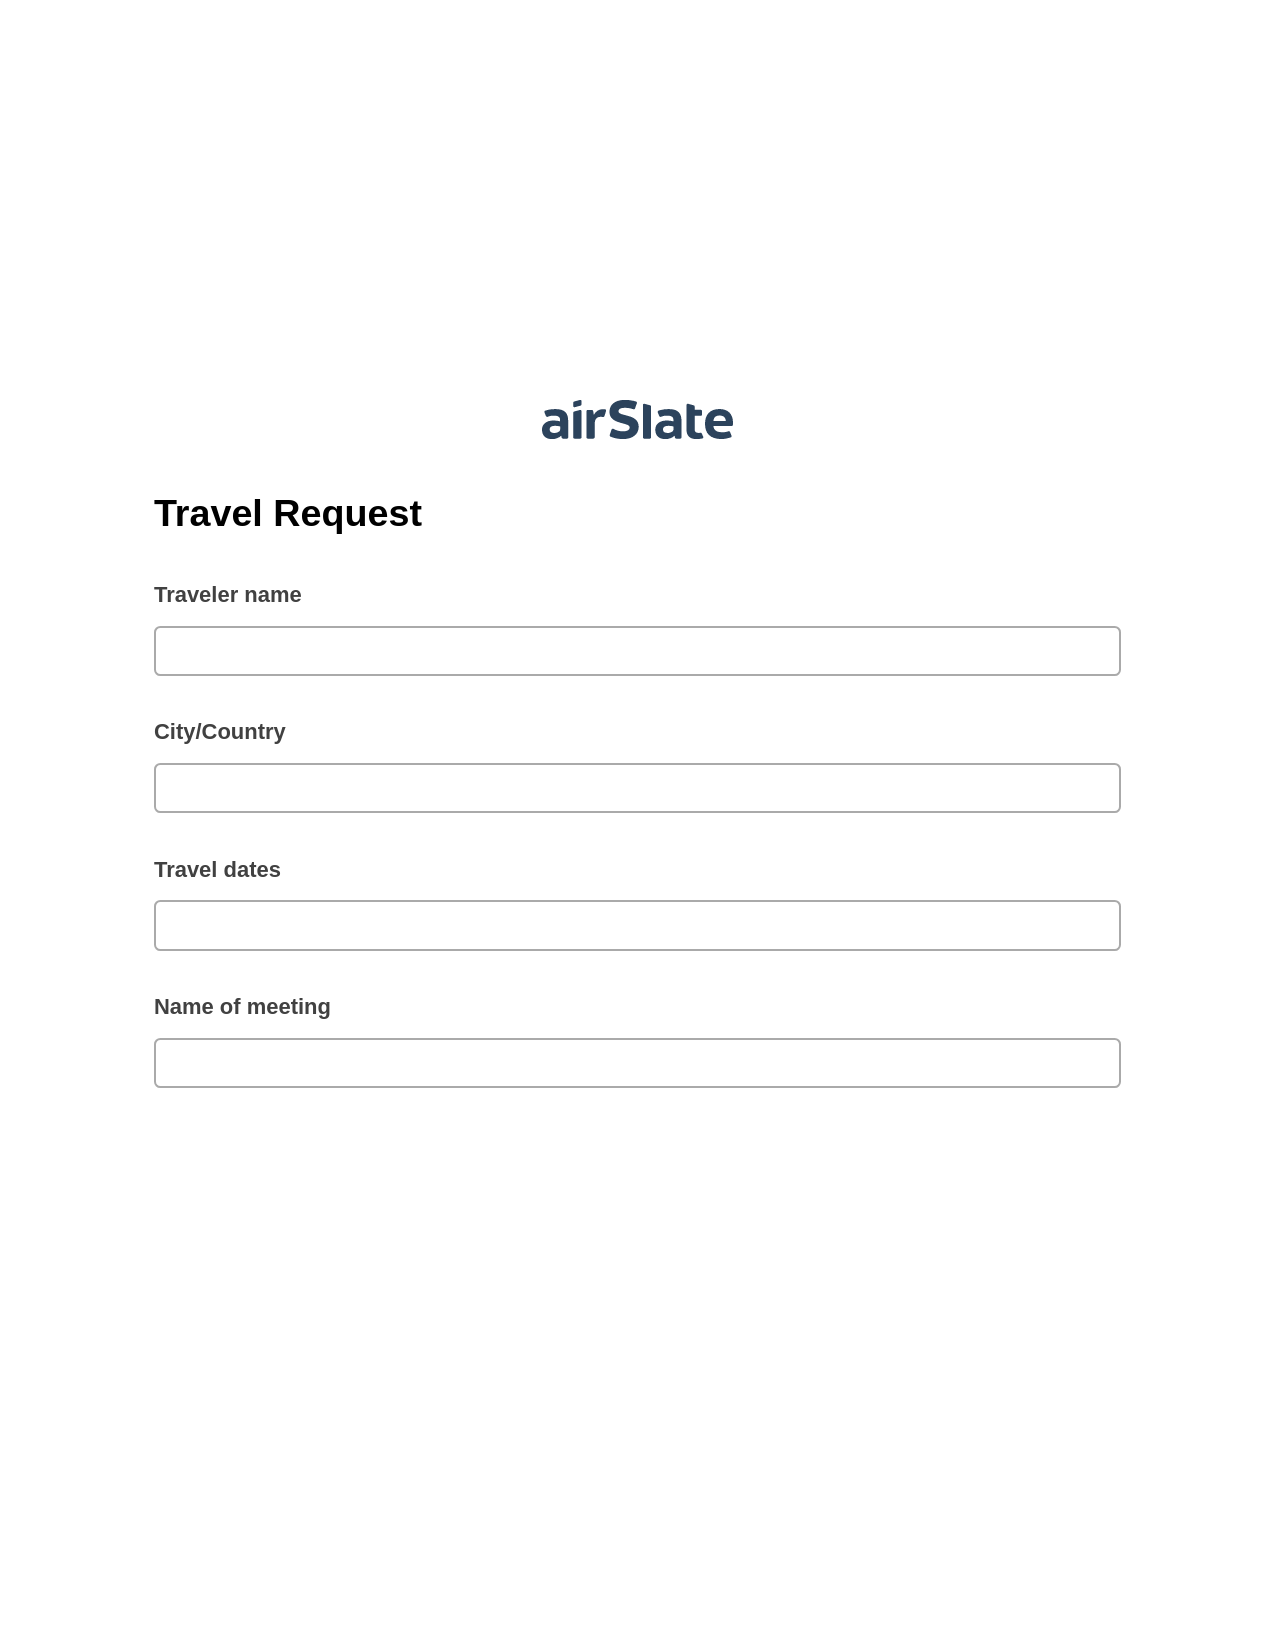 Multirole Travel Request Pre-fill from CSV File Bot, Lock the slate bot, Export to Excel 365 Bot